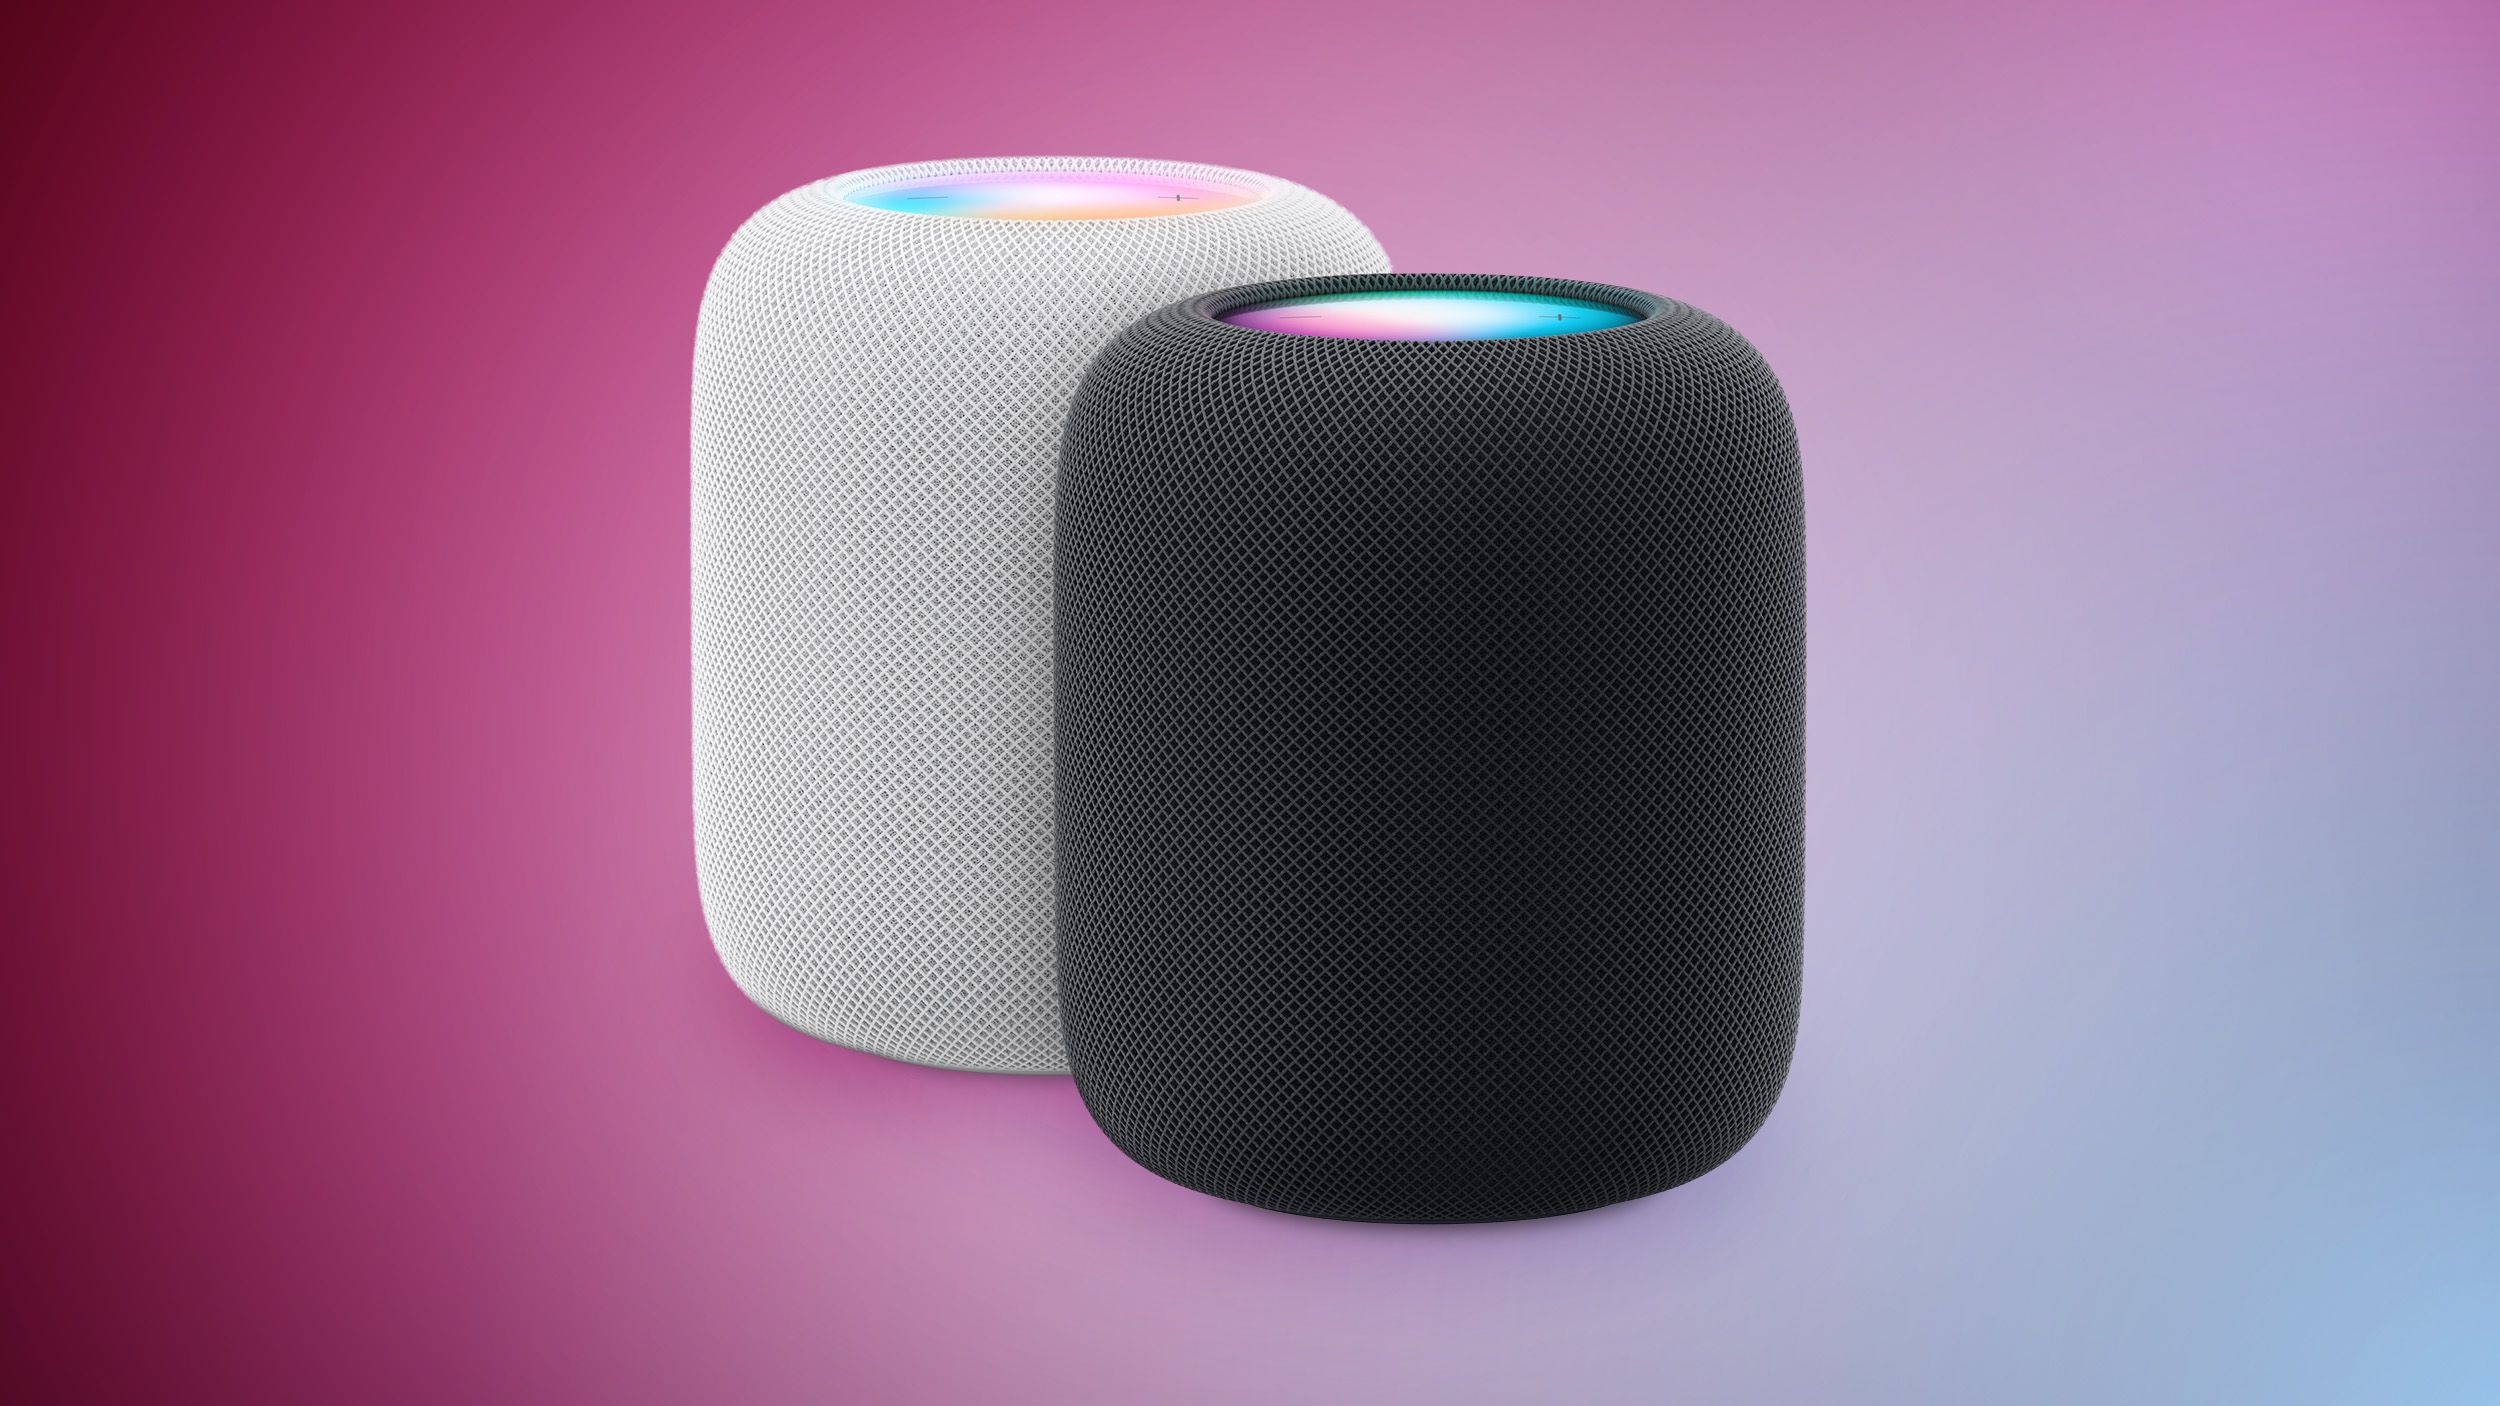 Apple Explains Why HomePod Was Released Again Wi-Fi 4 Limitation and More – MacRumors